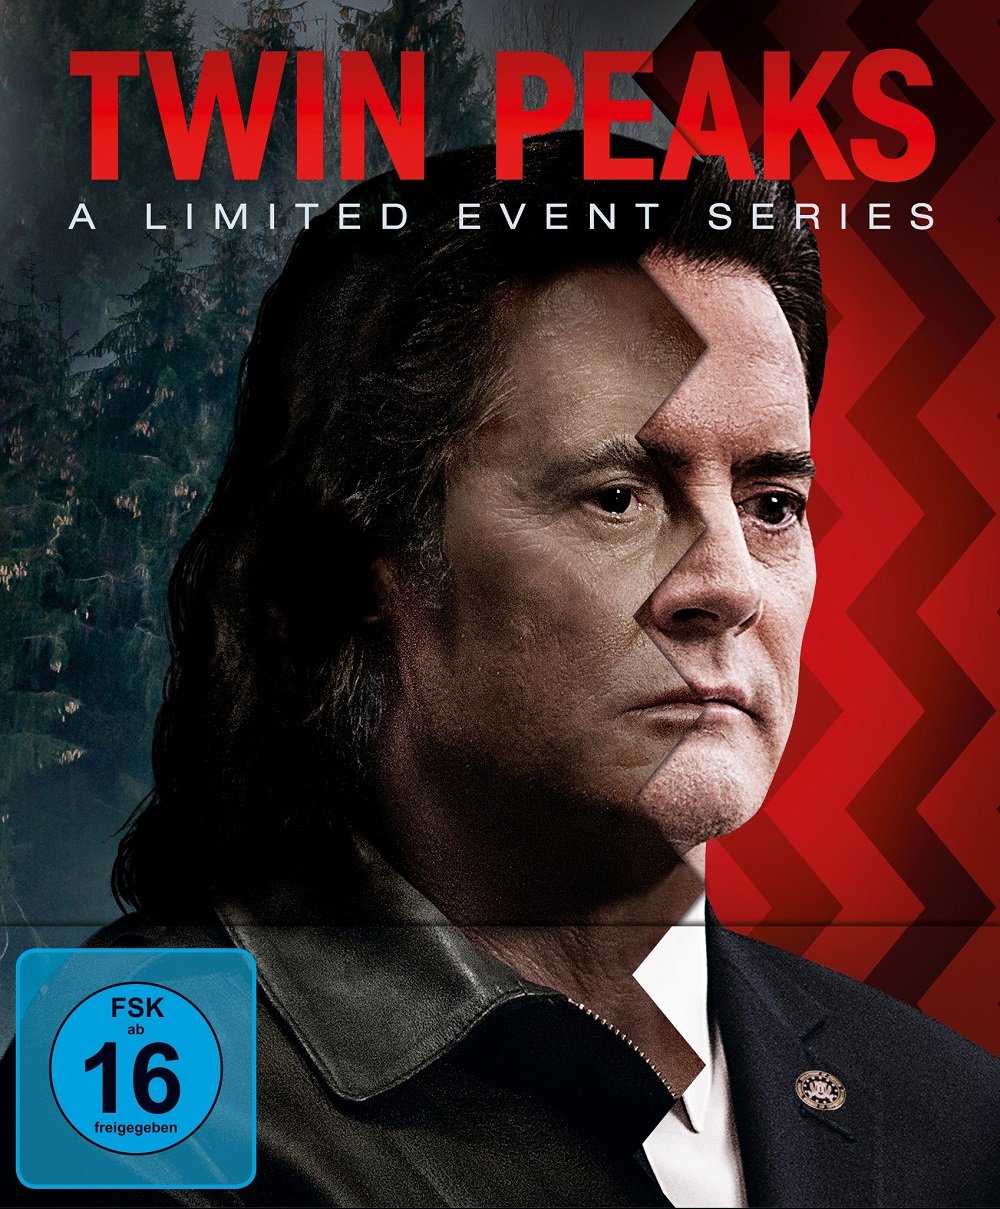 Twin Peaks A Limited Event Series - Limited Special Blu-ray Edition [Blu-ray]